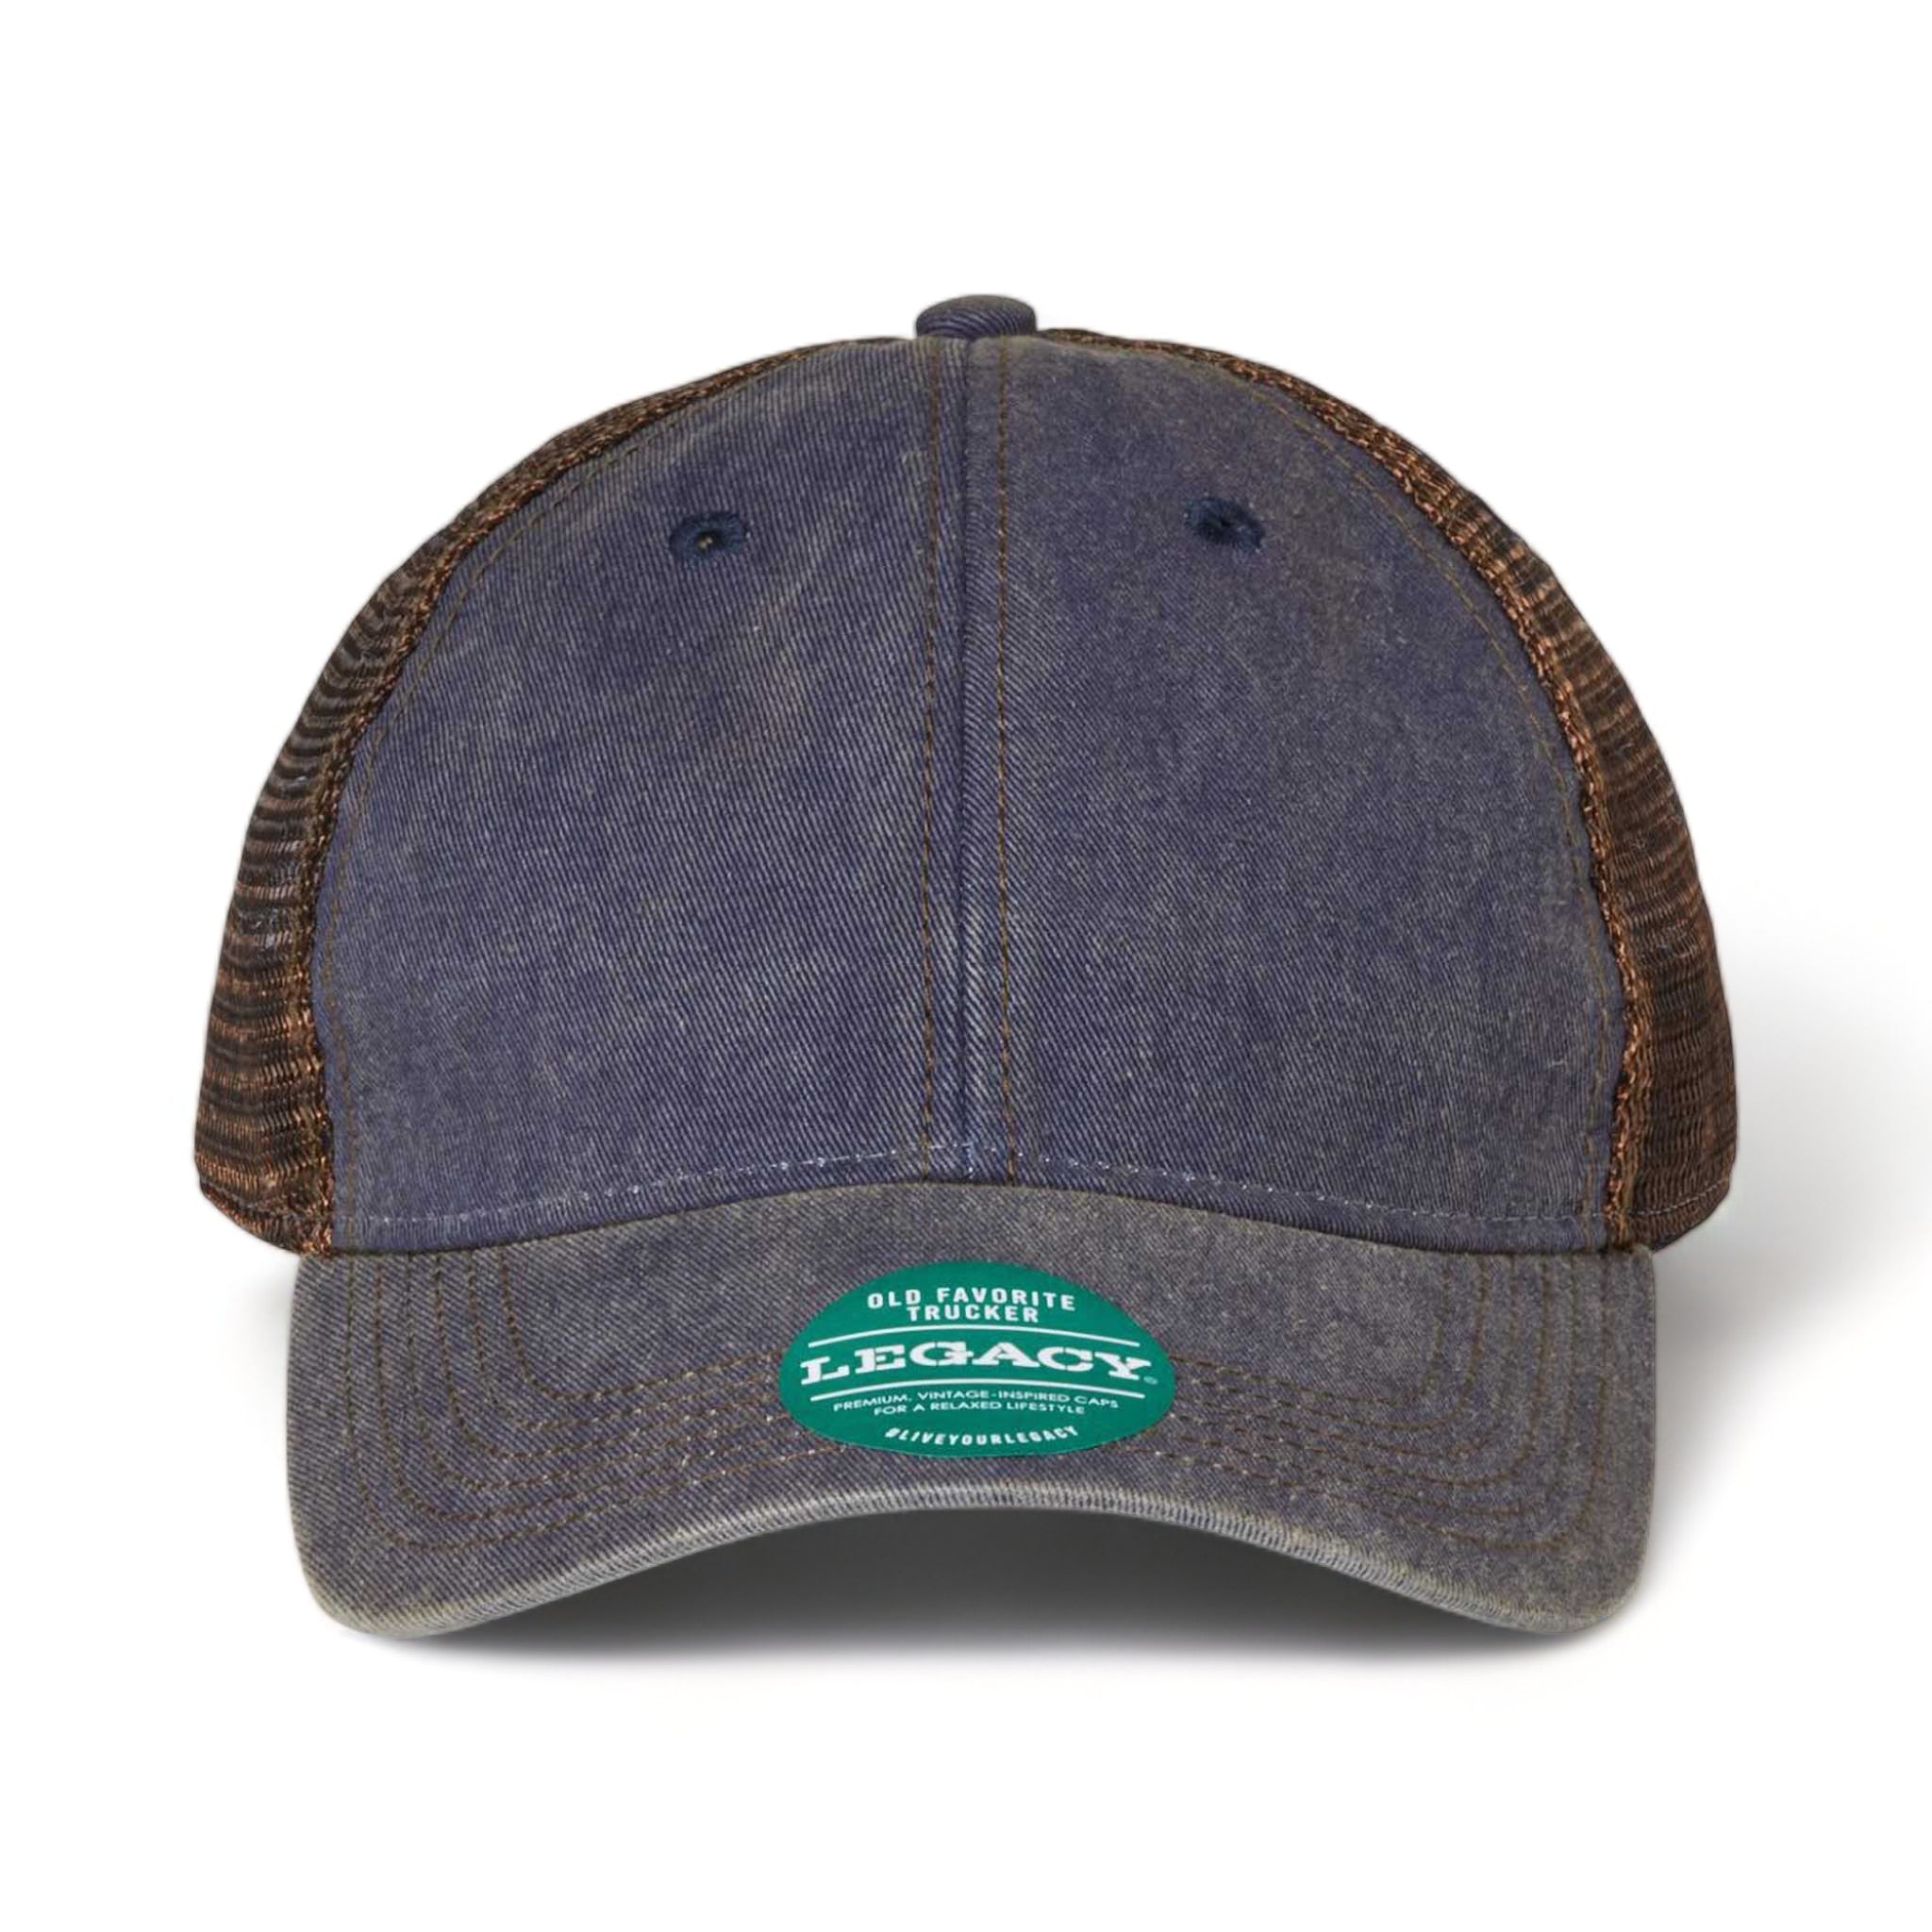 Front view of LEGACY OFA custom hat in navy and brown